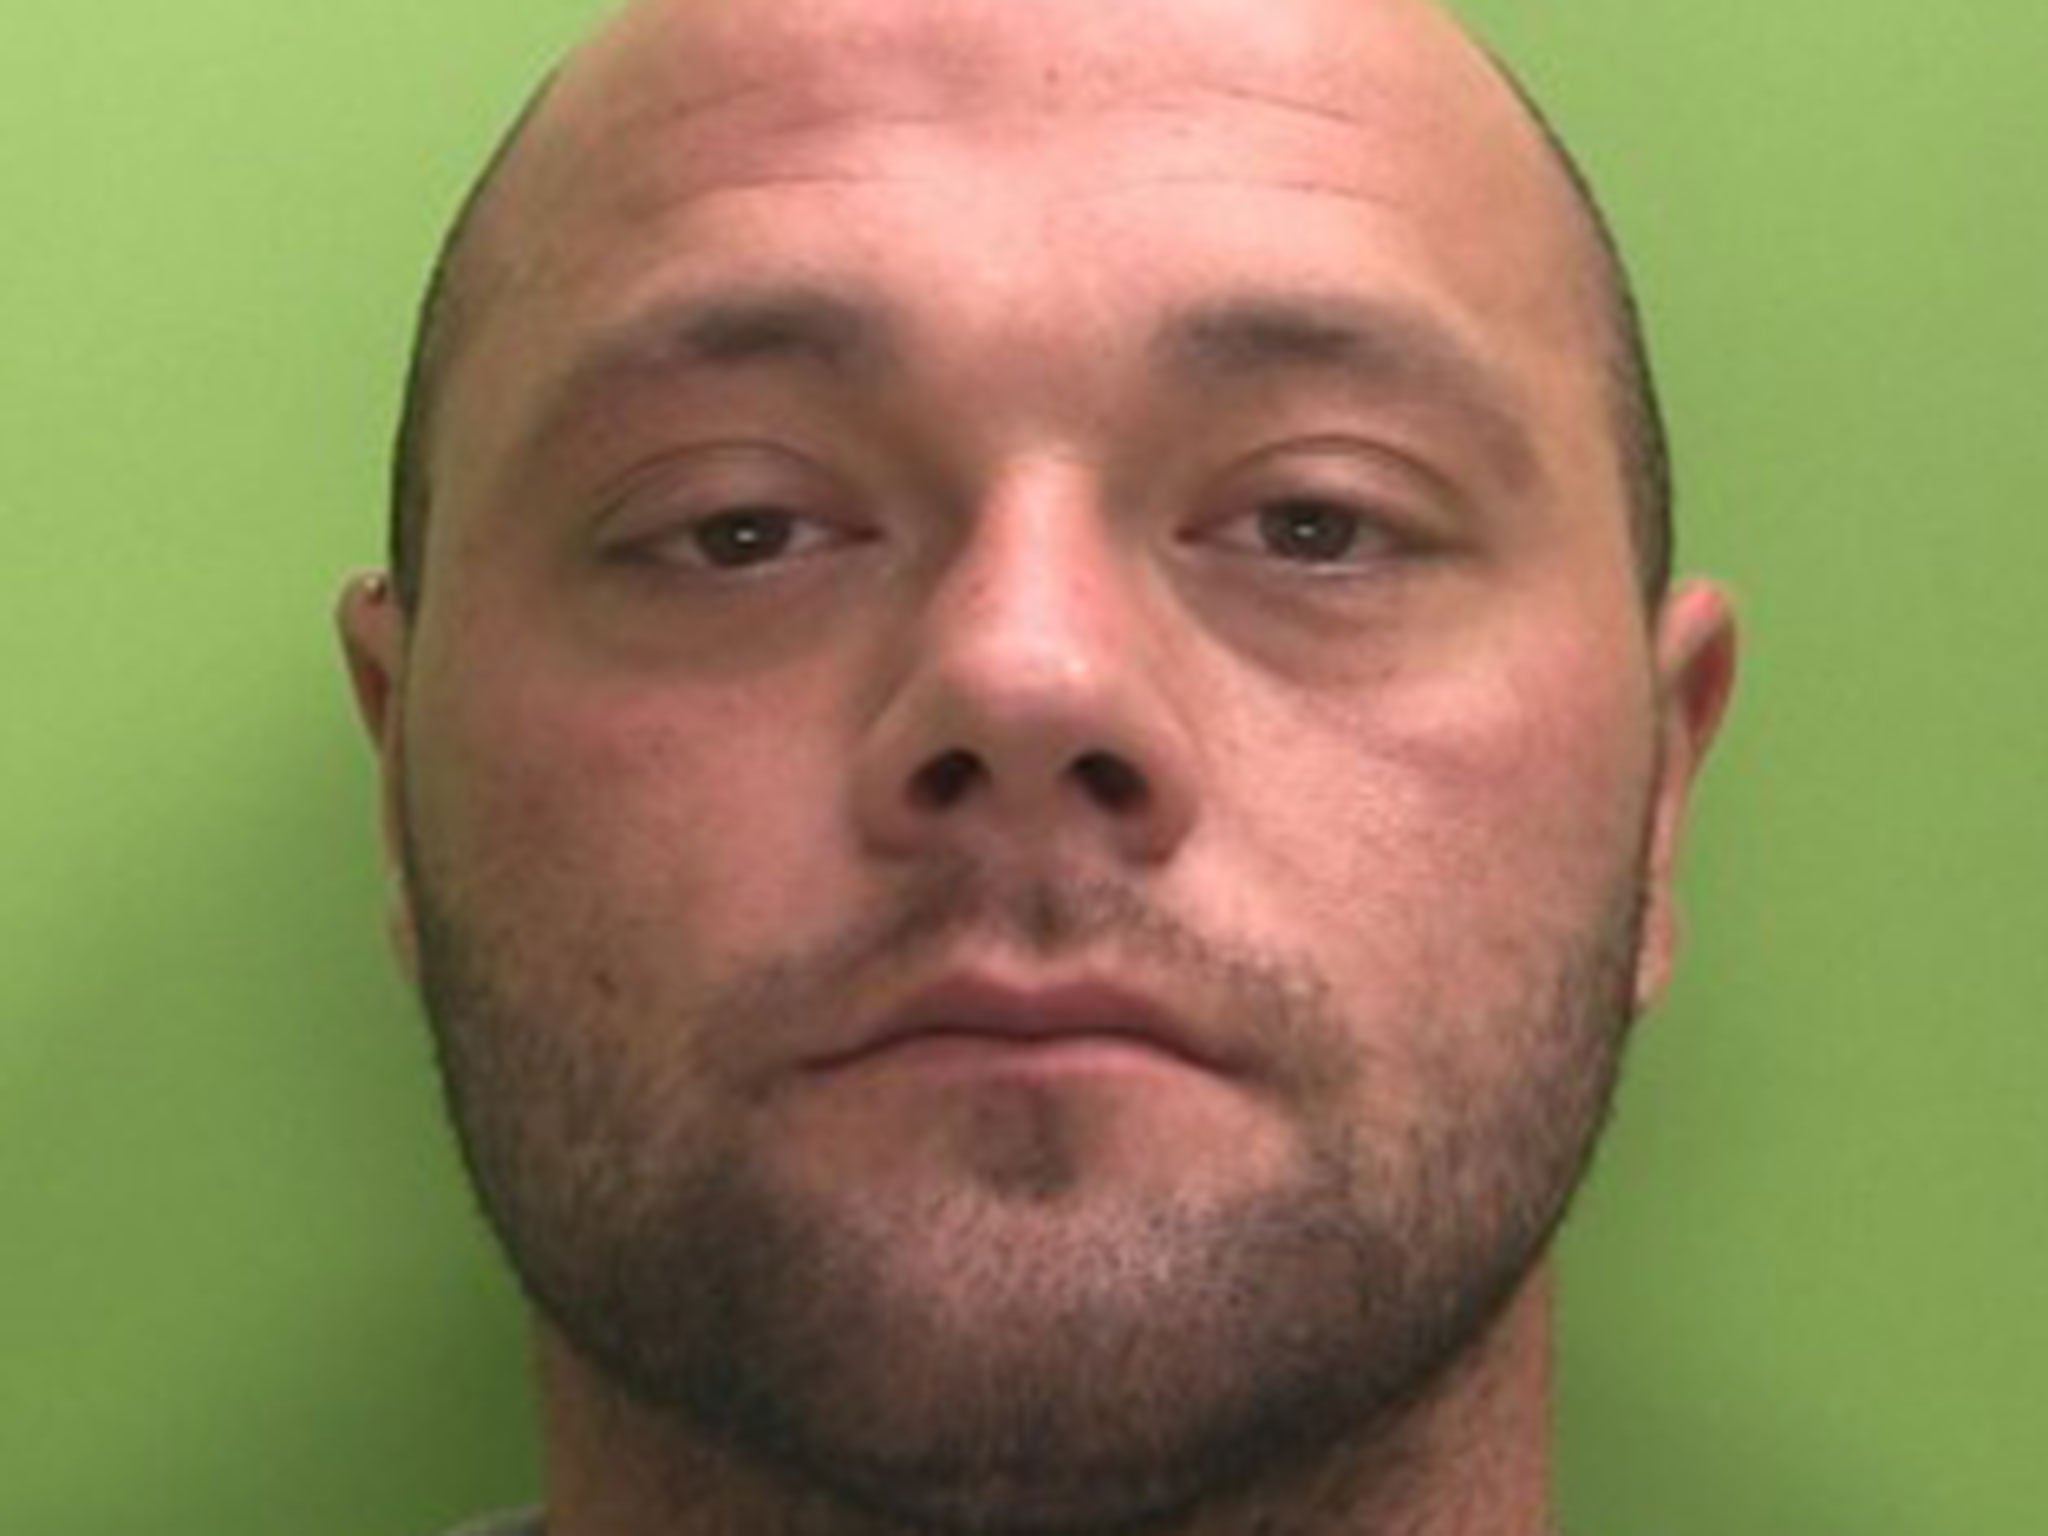 Sam Spaven, 27, drove his Audi A4 into Richard Pencott, 44, as he was cycling home from work